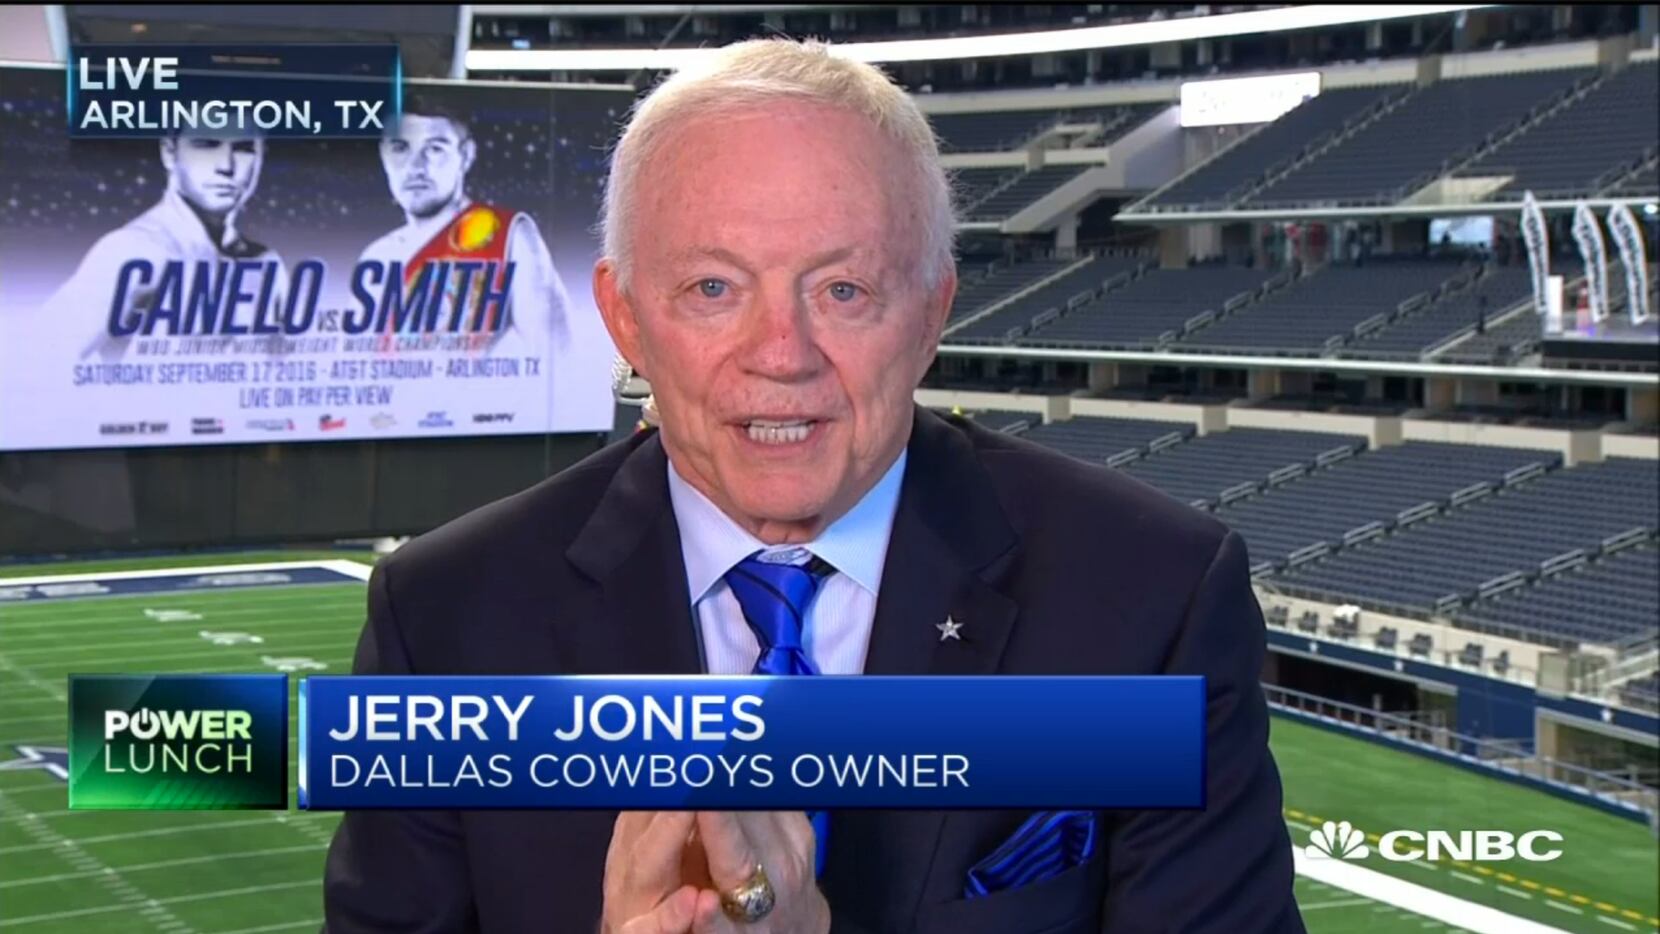 Jerry Jones talks about the latest Cowboys updates on CNBC's "Power Lunch" Monday.